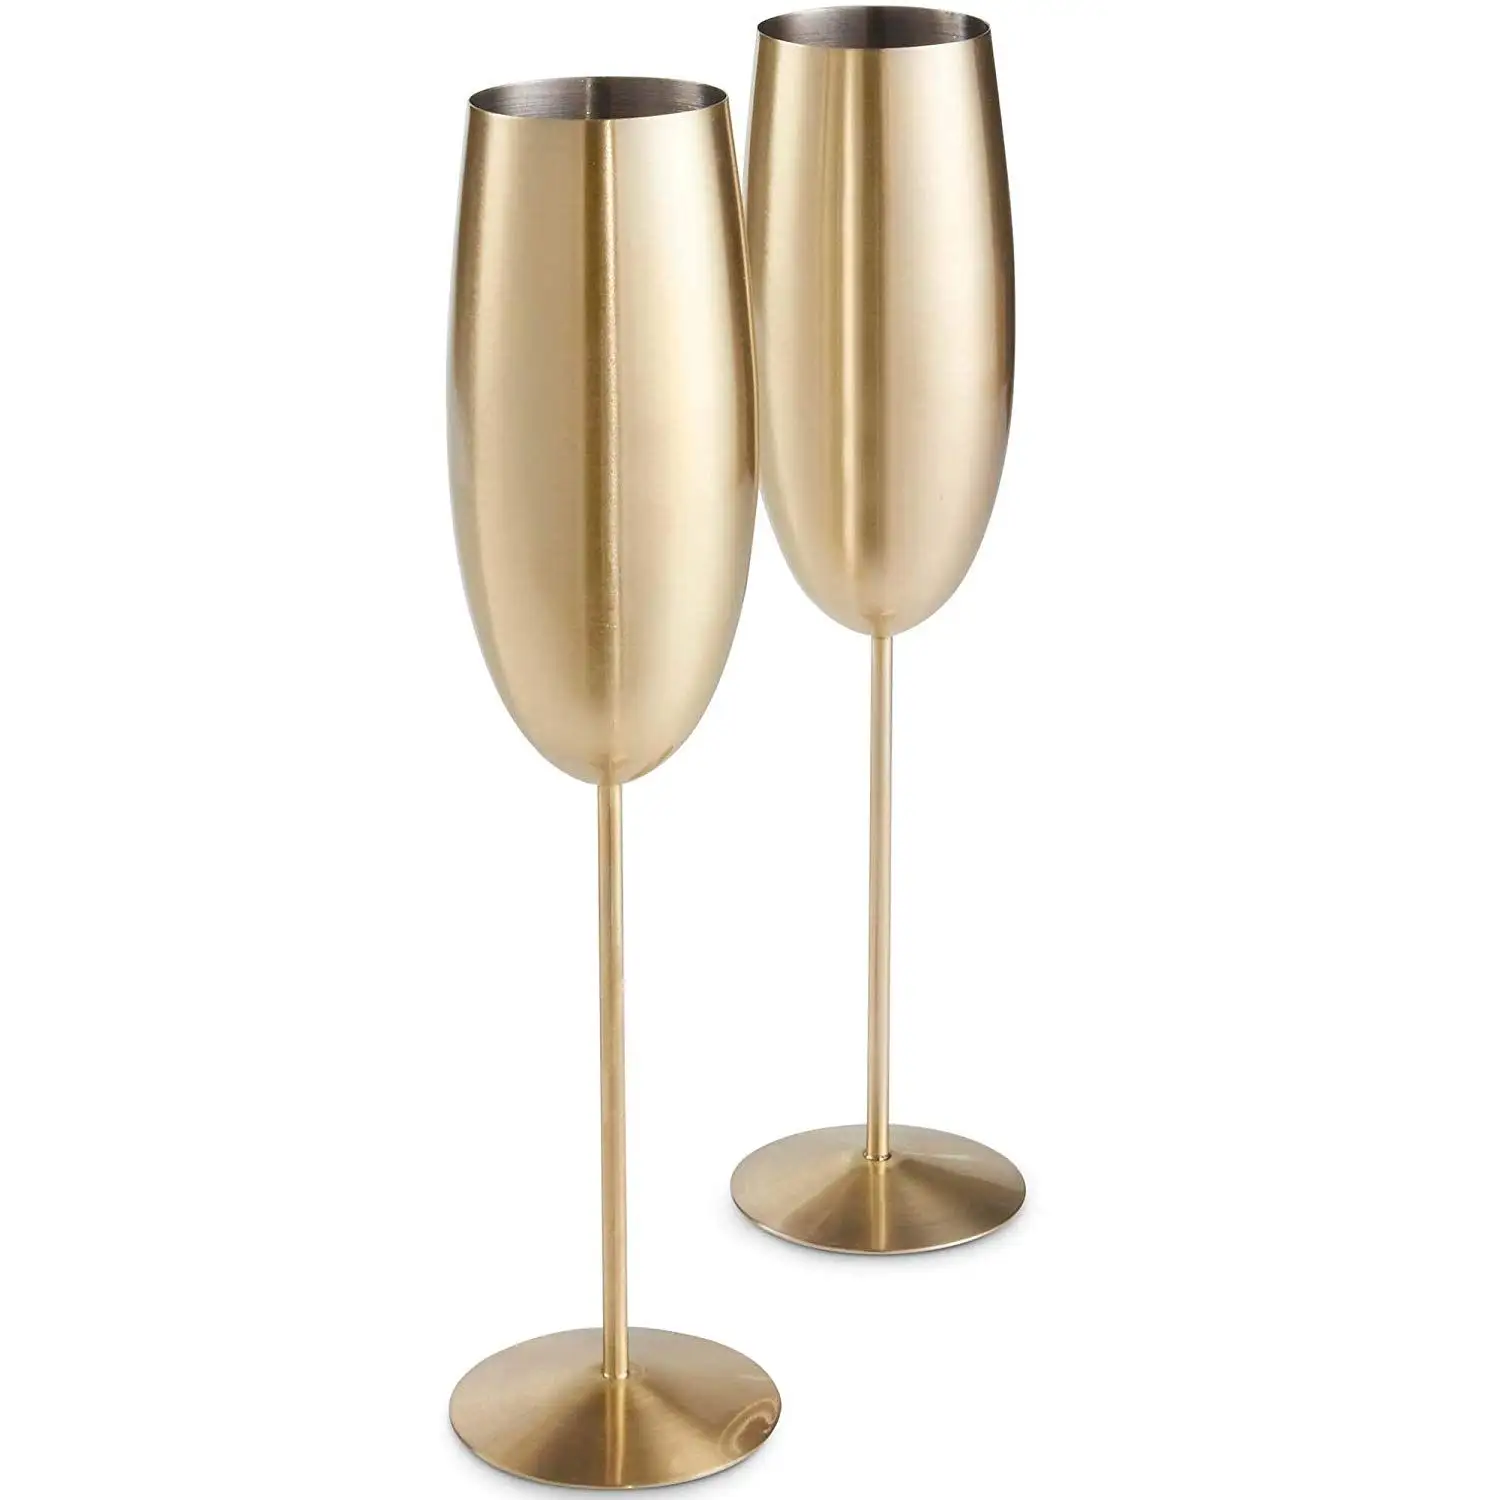 300 ml Stainless Steel Copper Champagne Cup/Glass For Wine